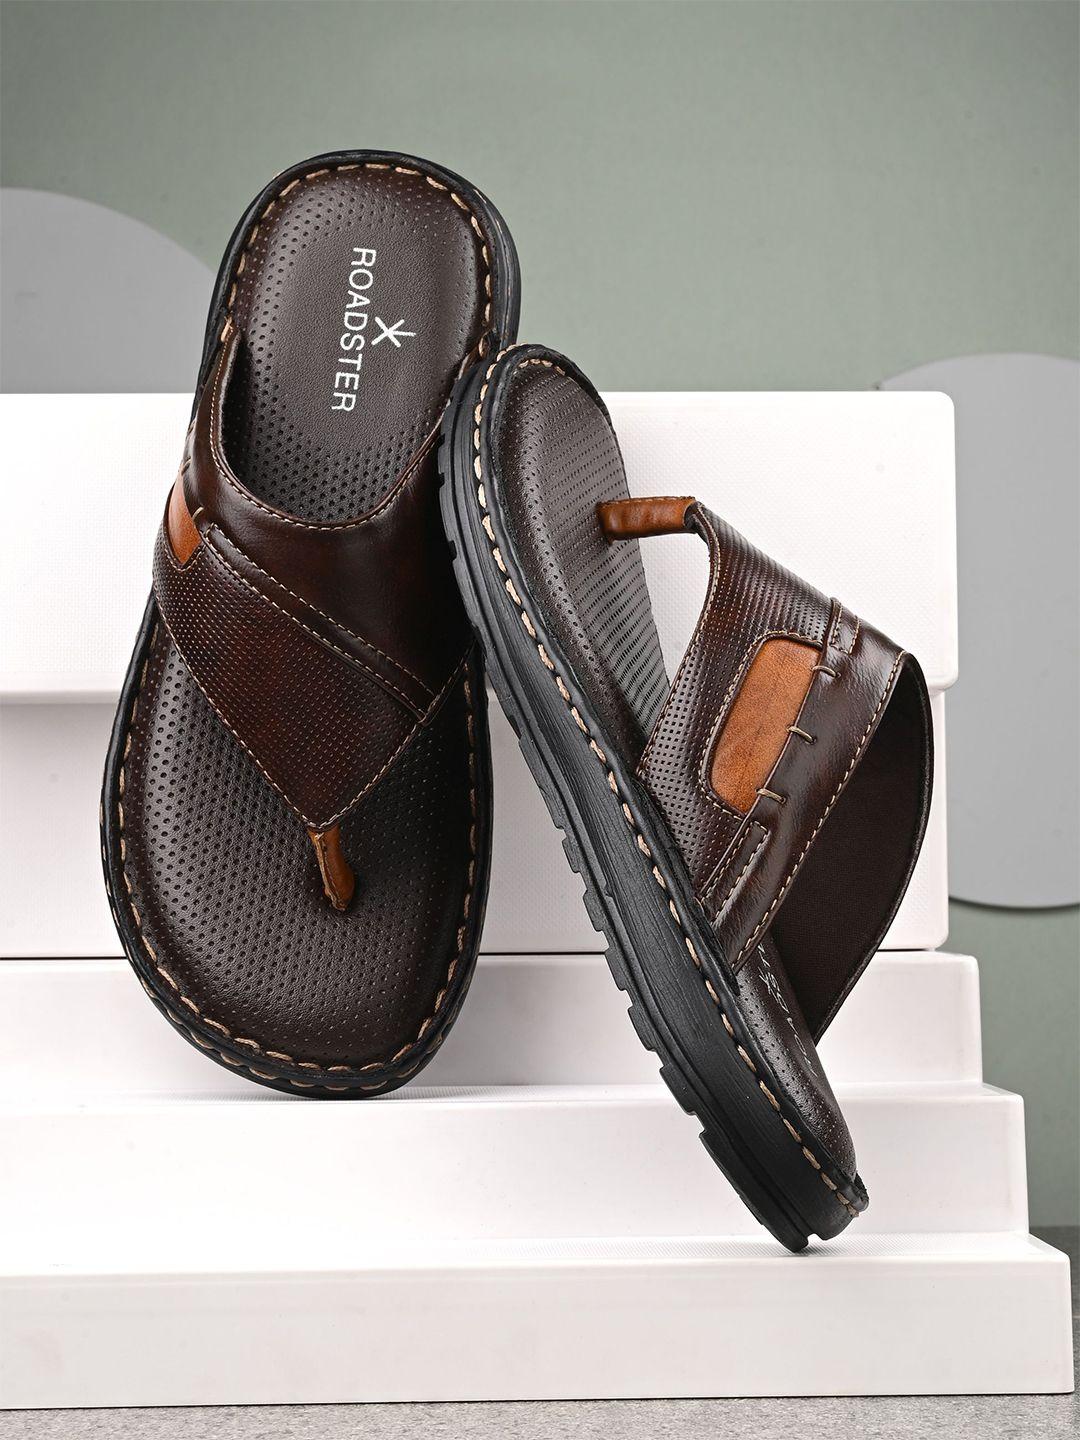 the roadster lifestyle co. brown textured comfort sandals